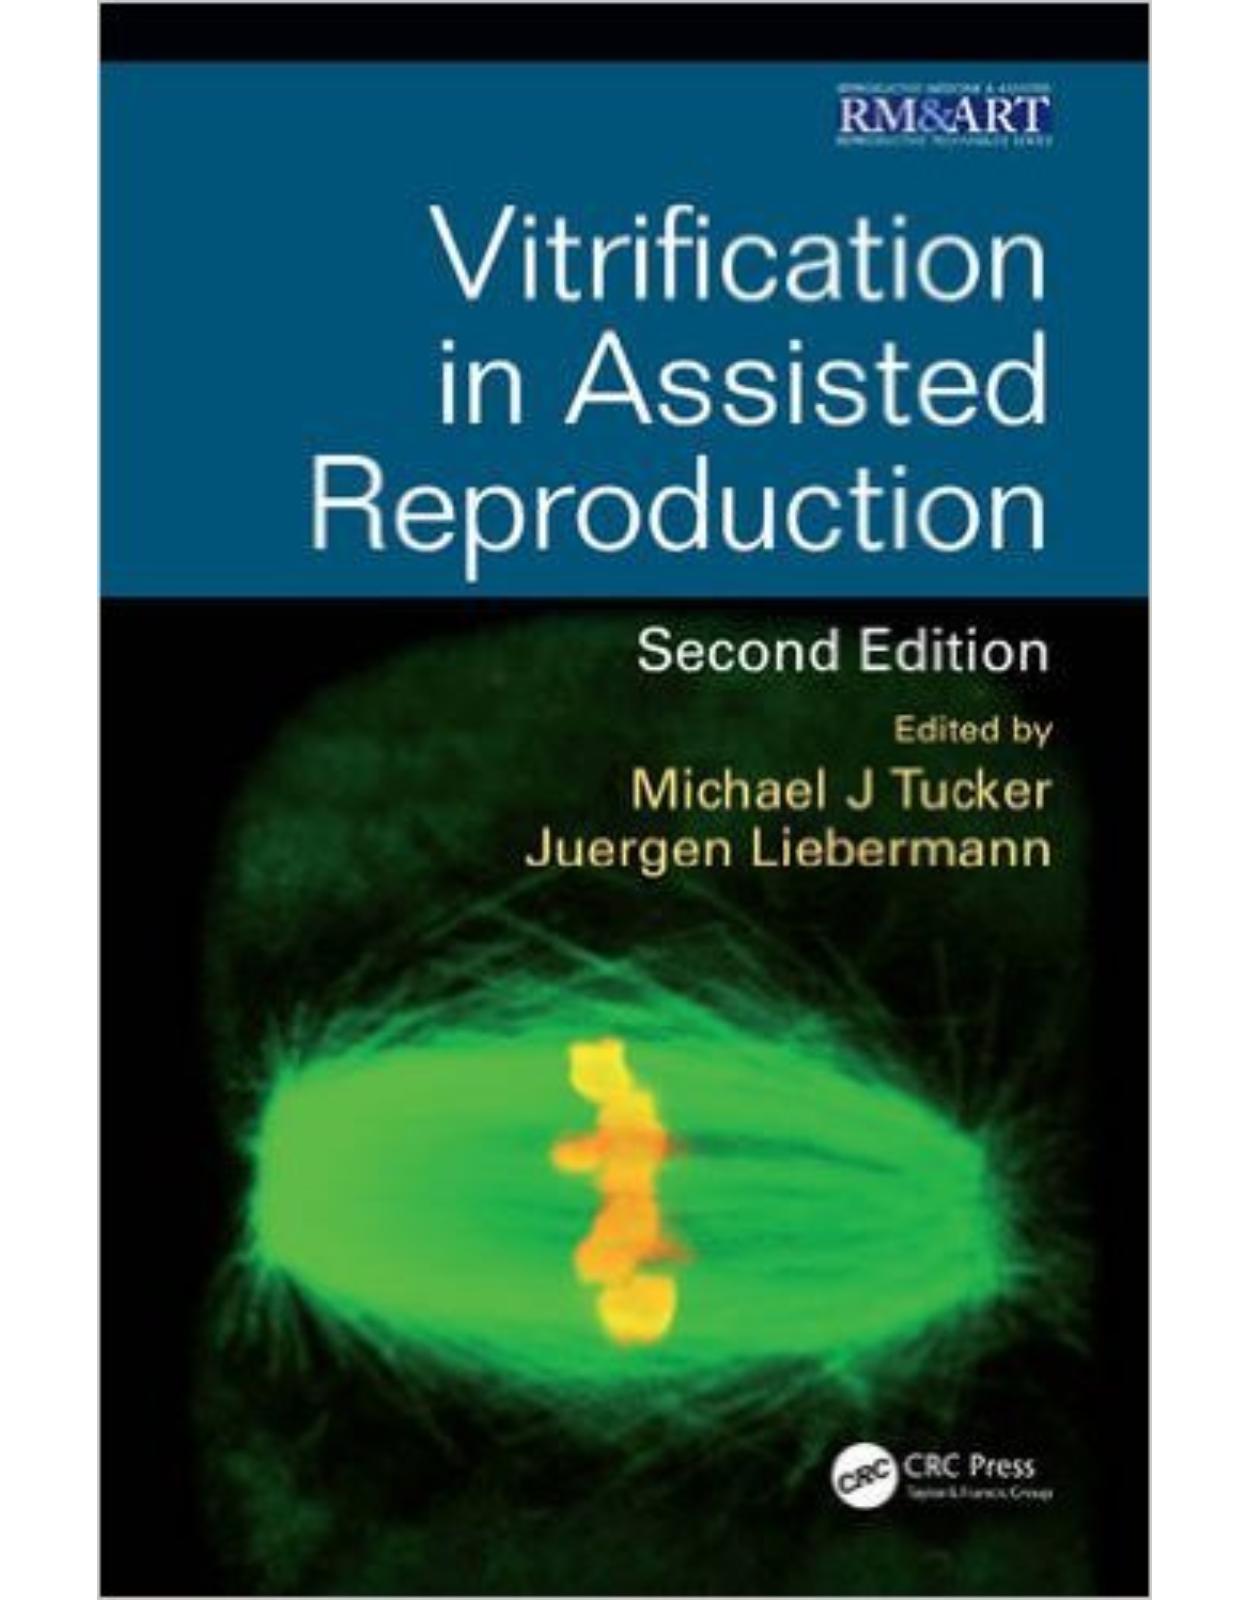 Vitrification in Assisted Reproduction, Second Edition (Reproductive Medicine and Assisted Reproductive Techniques Series)